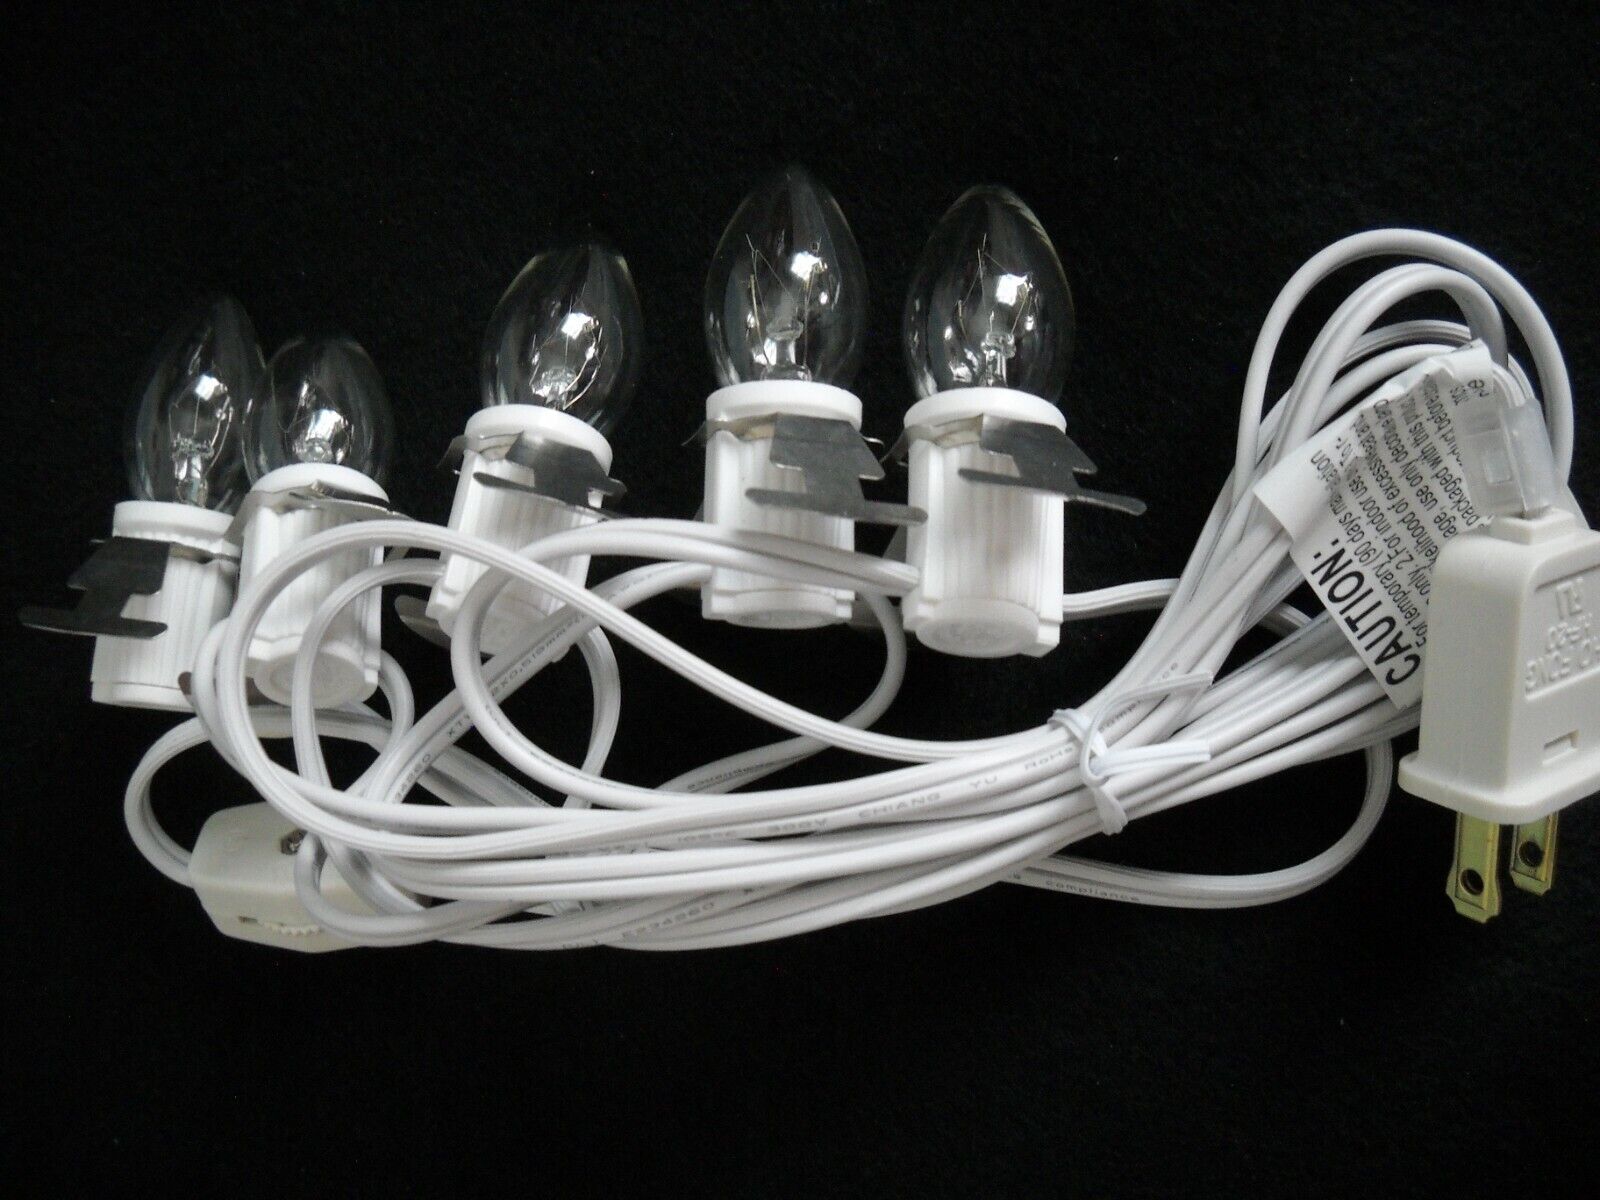 5 Light Set for Christmas Village Buildings with on/off Switch White Cord